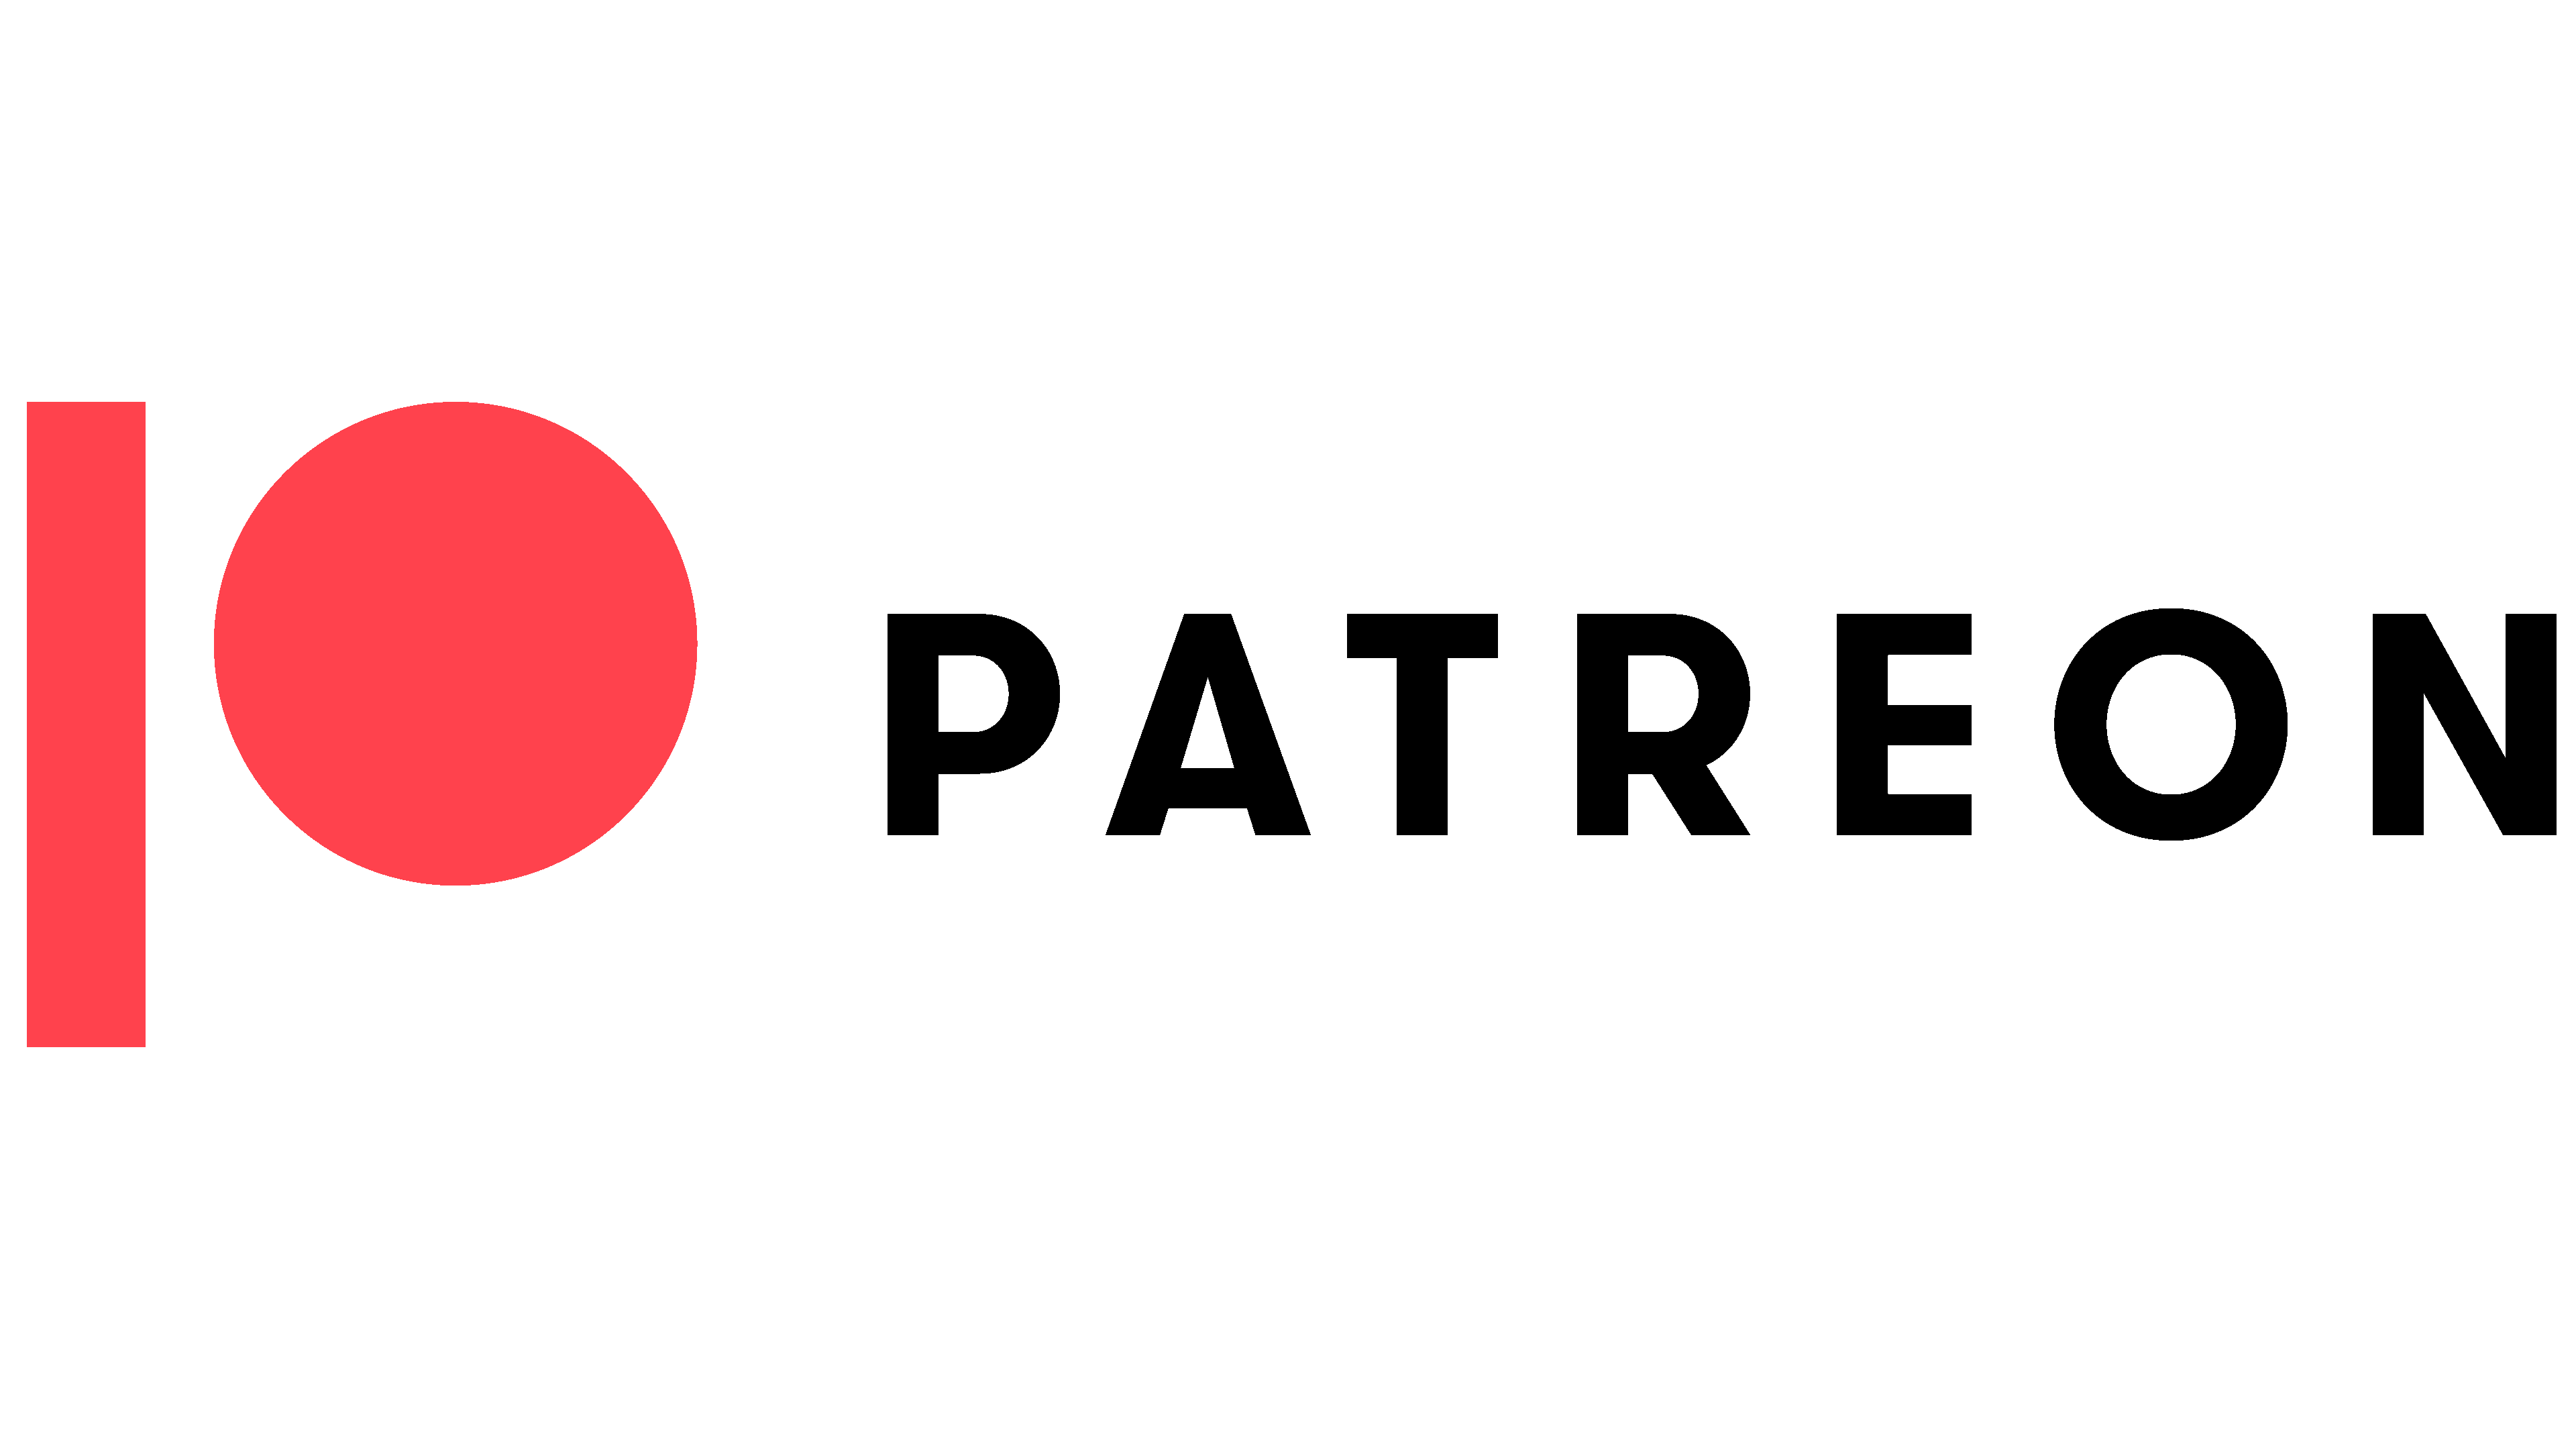 The logo of Patreon